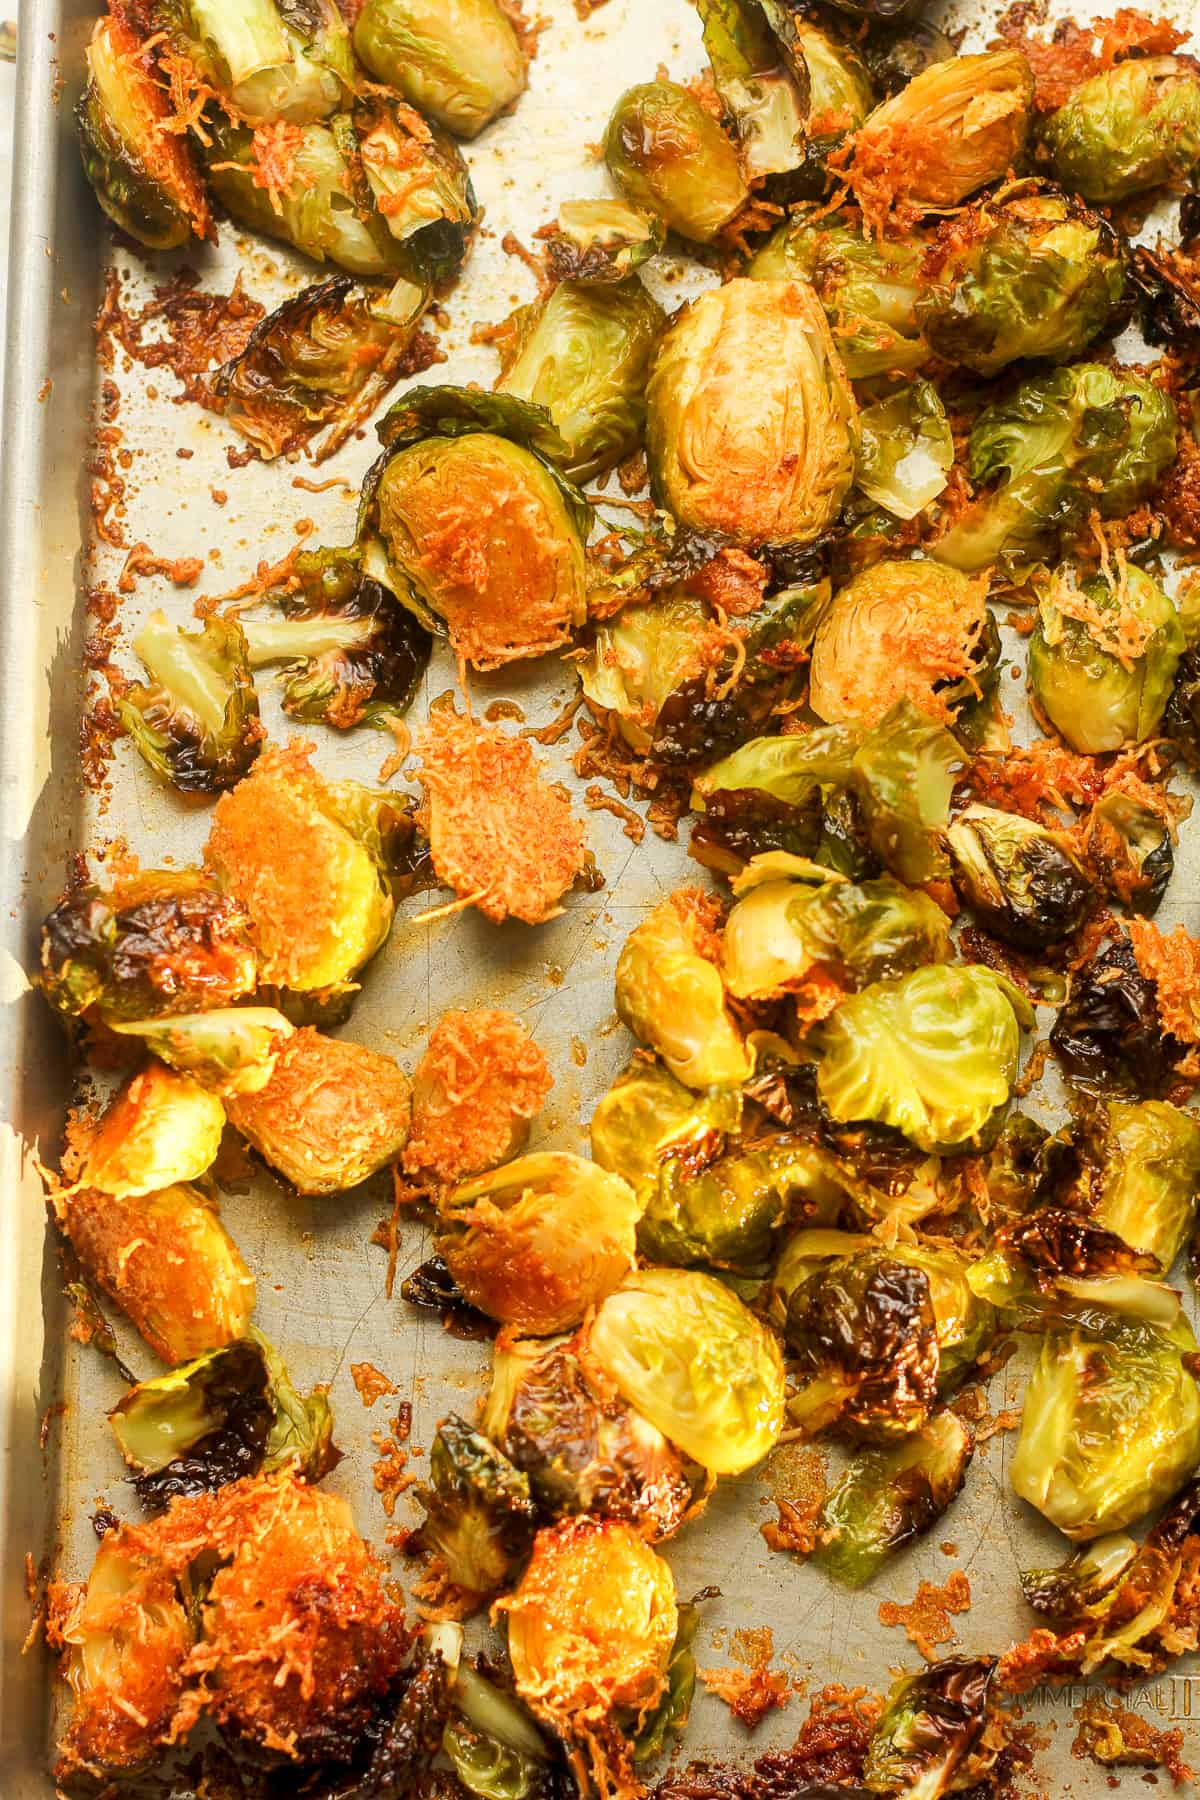 A pan of the just roasted brussels sprouts.